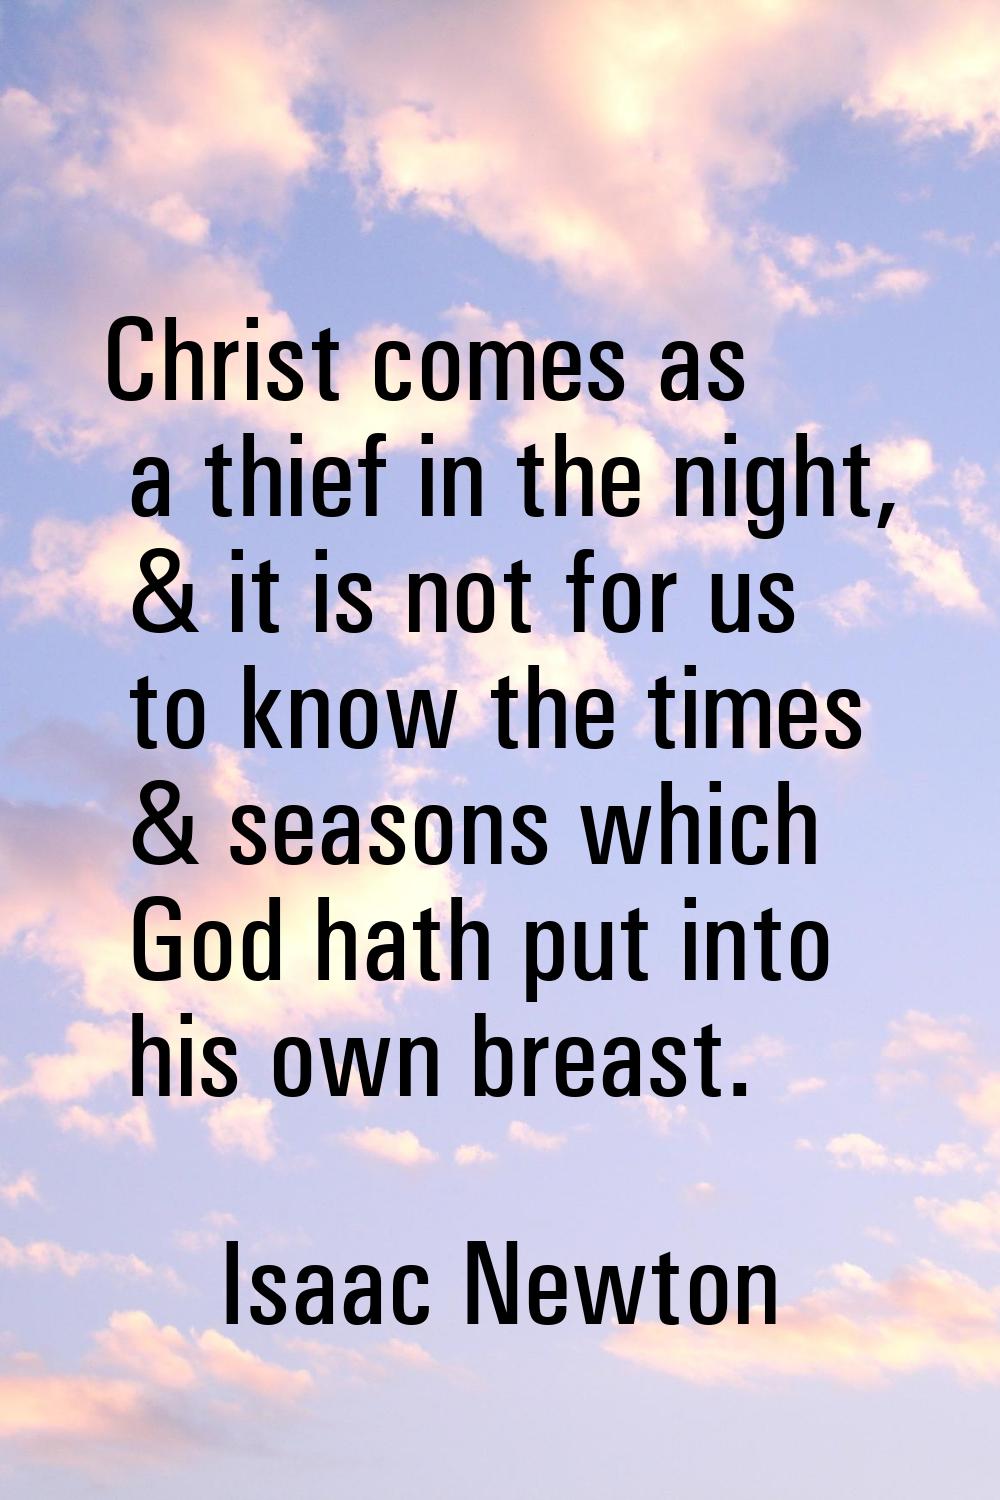 Christ comes as a thief in the night, & it is not for us to know the times & seasons which God hath